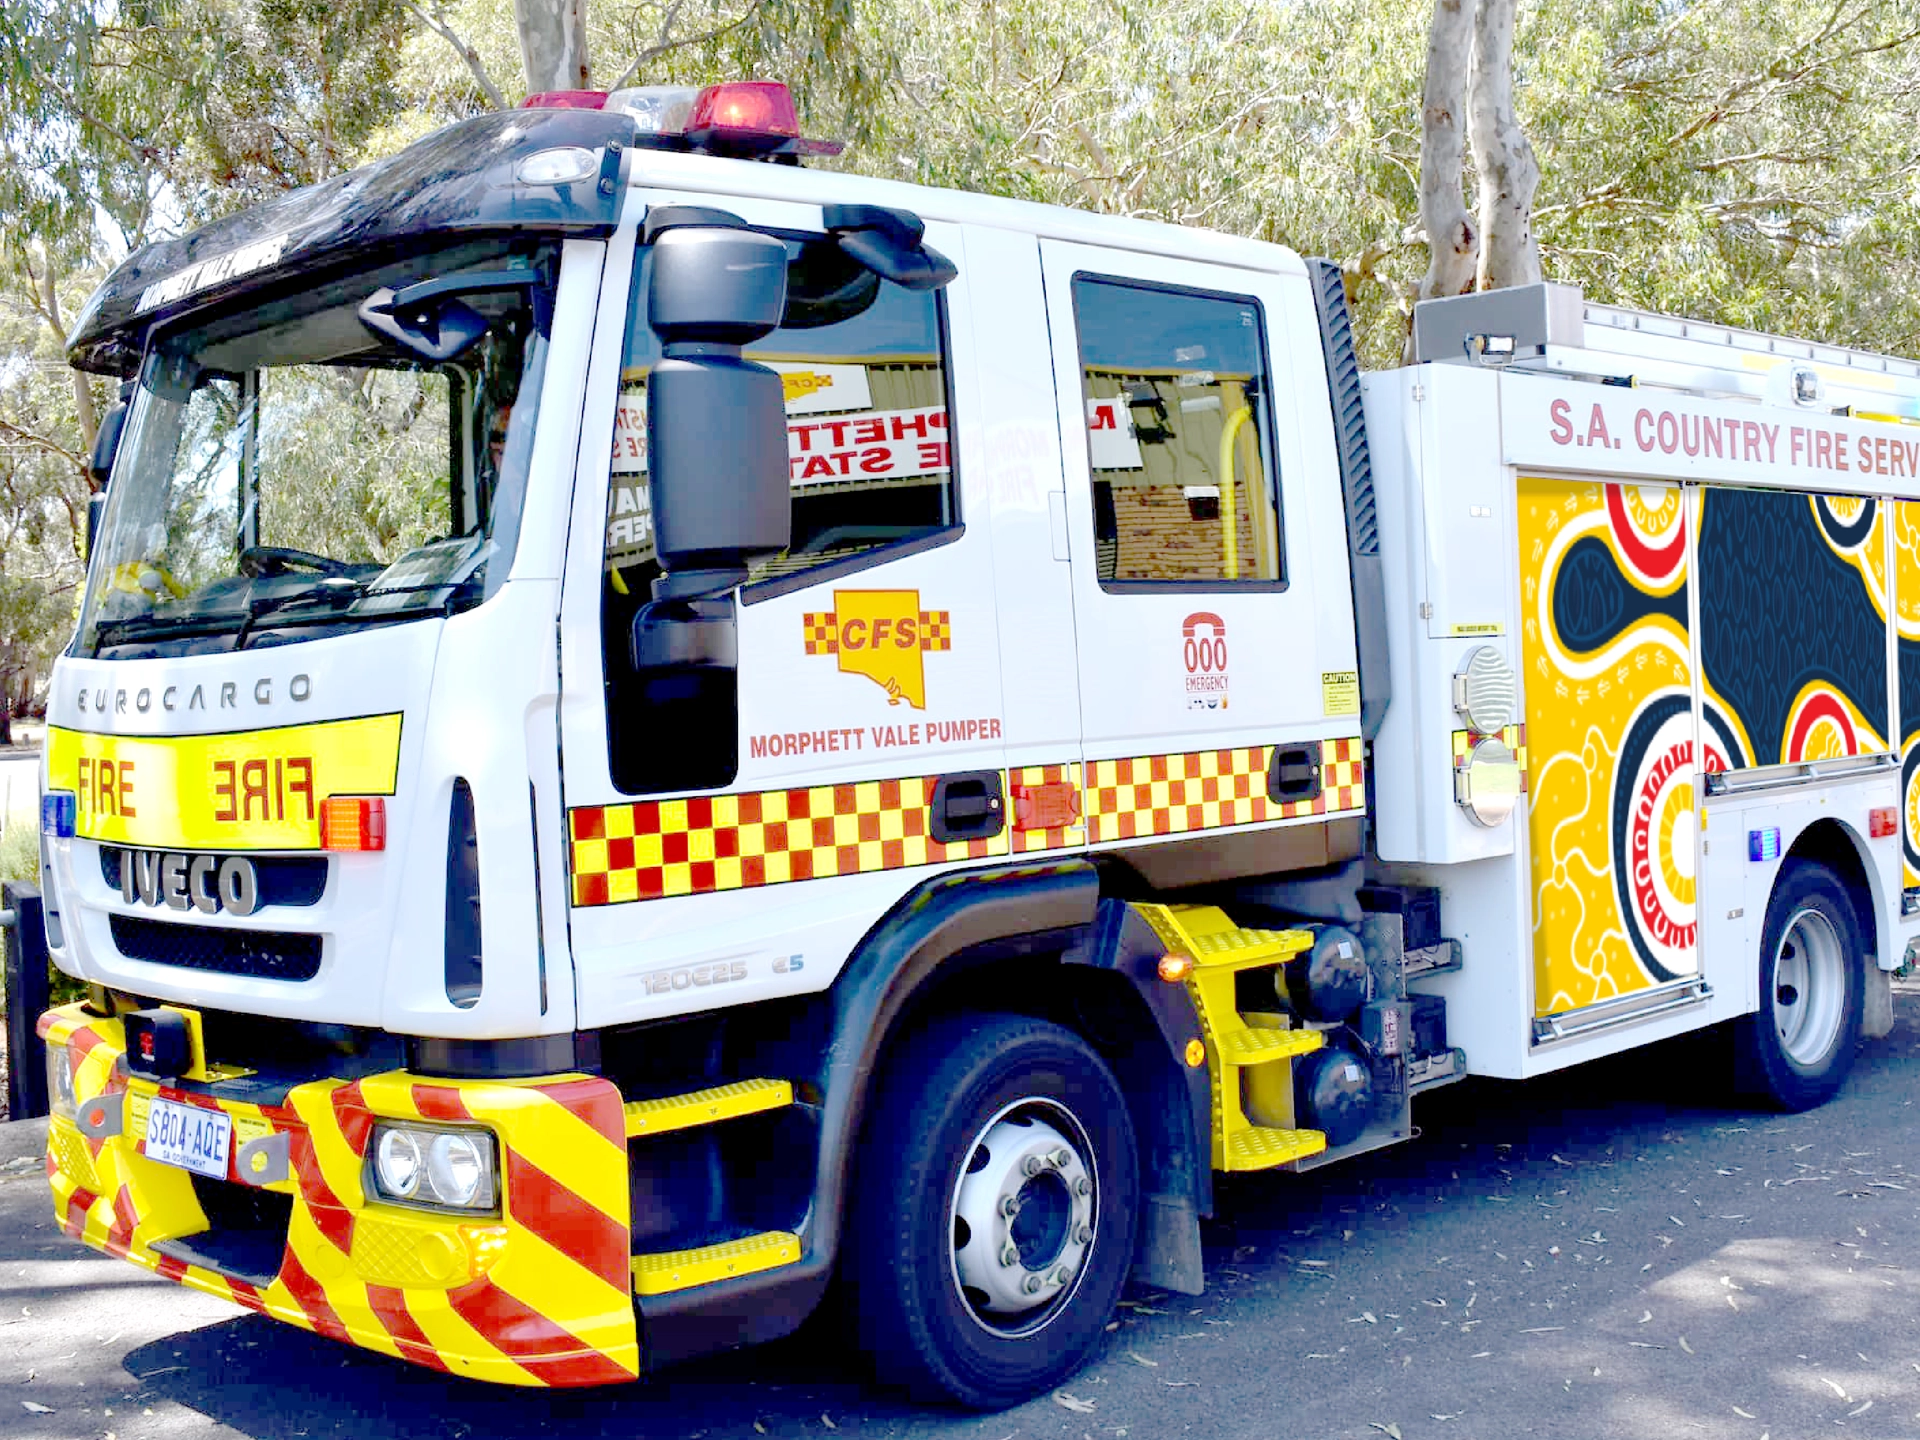 South Australian Country Fire Service (SACFS) - reconciliation truck with pattern design